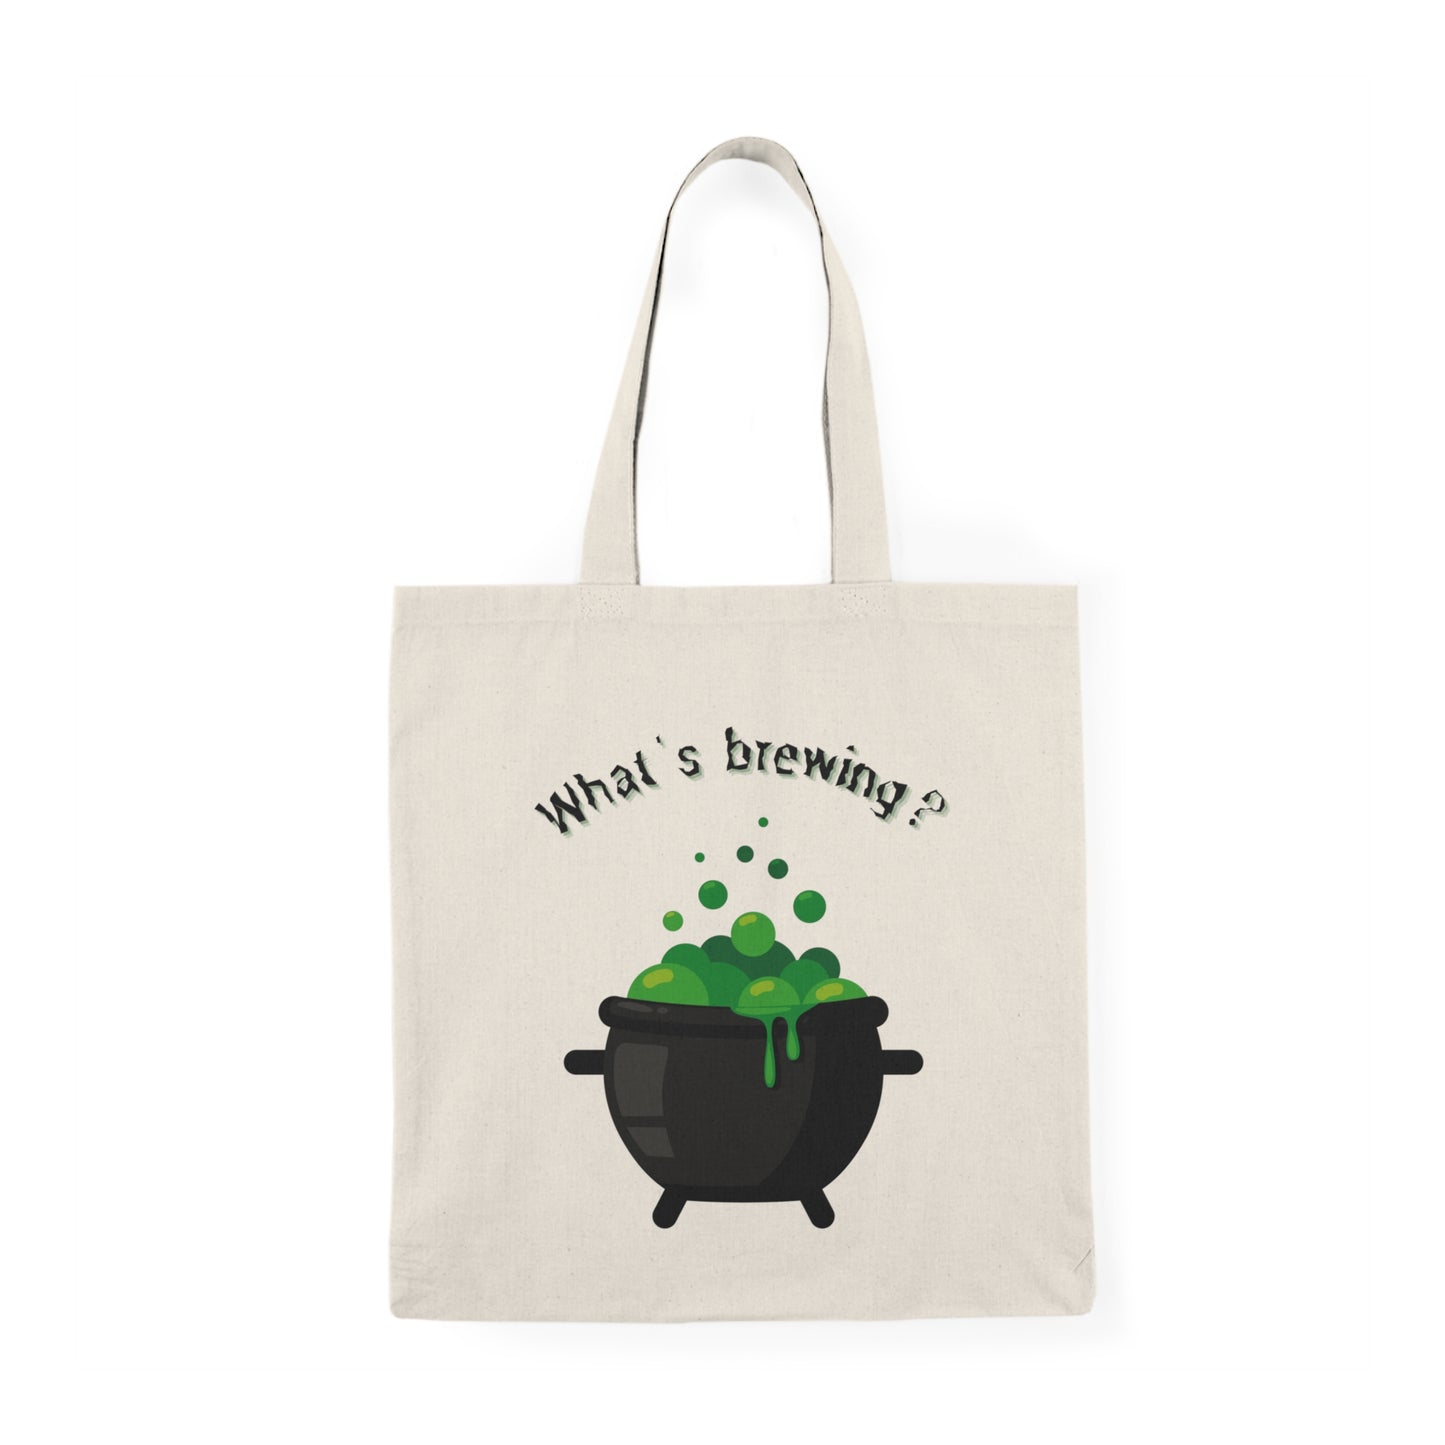 Halloween Tote Bag-What's Brewing?